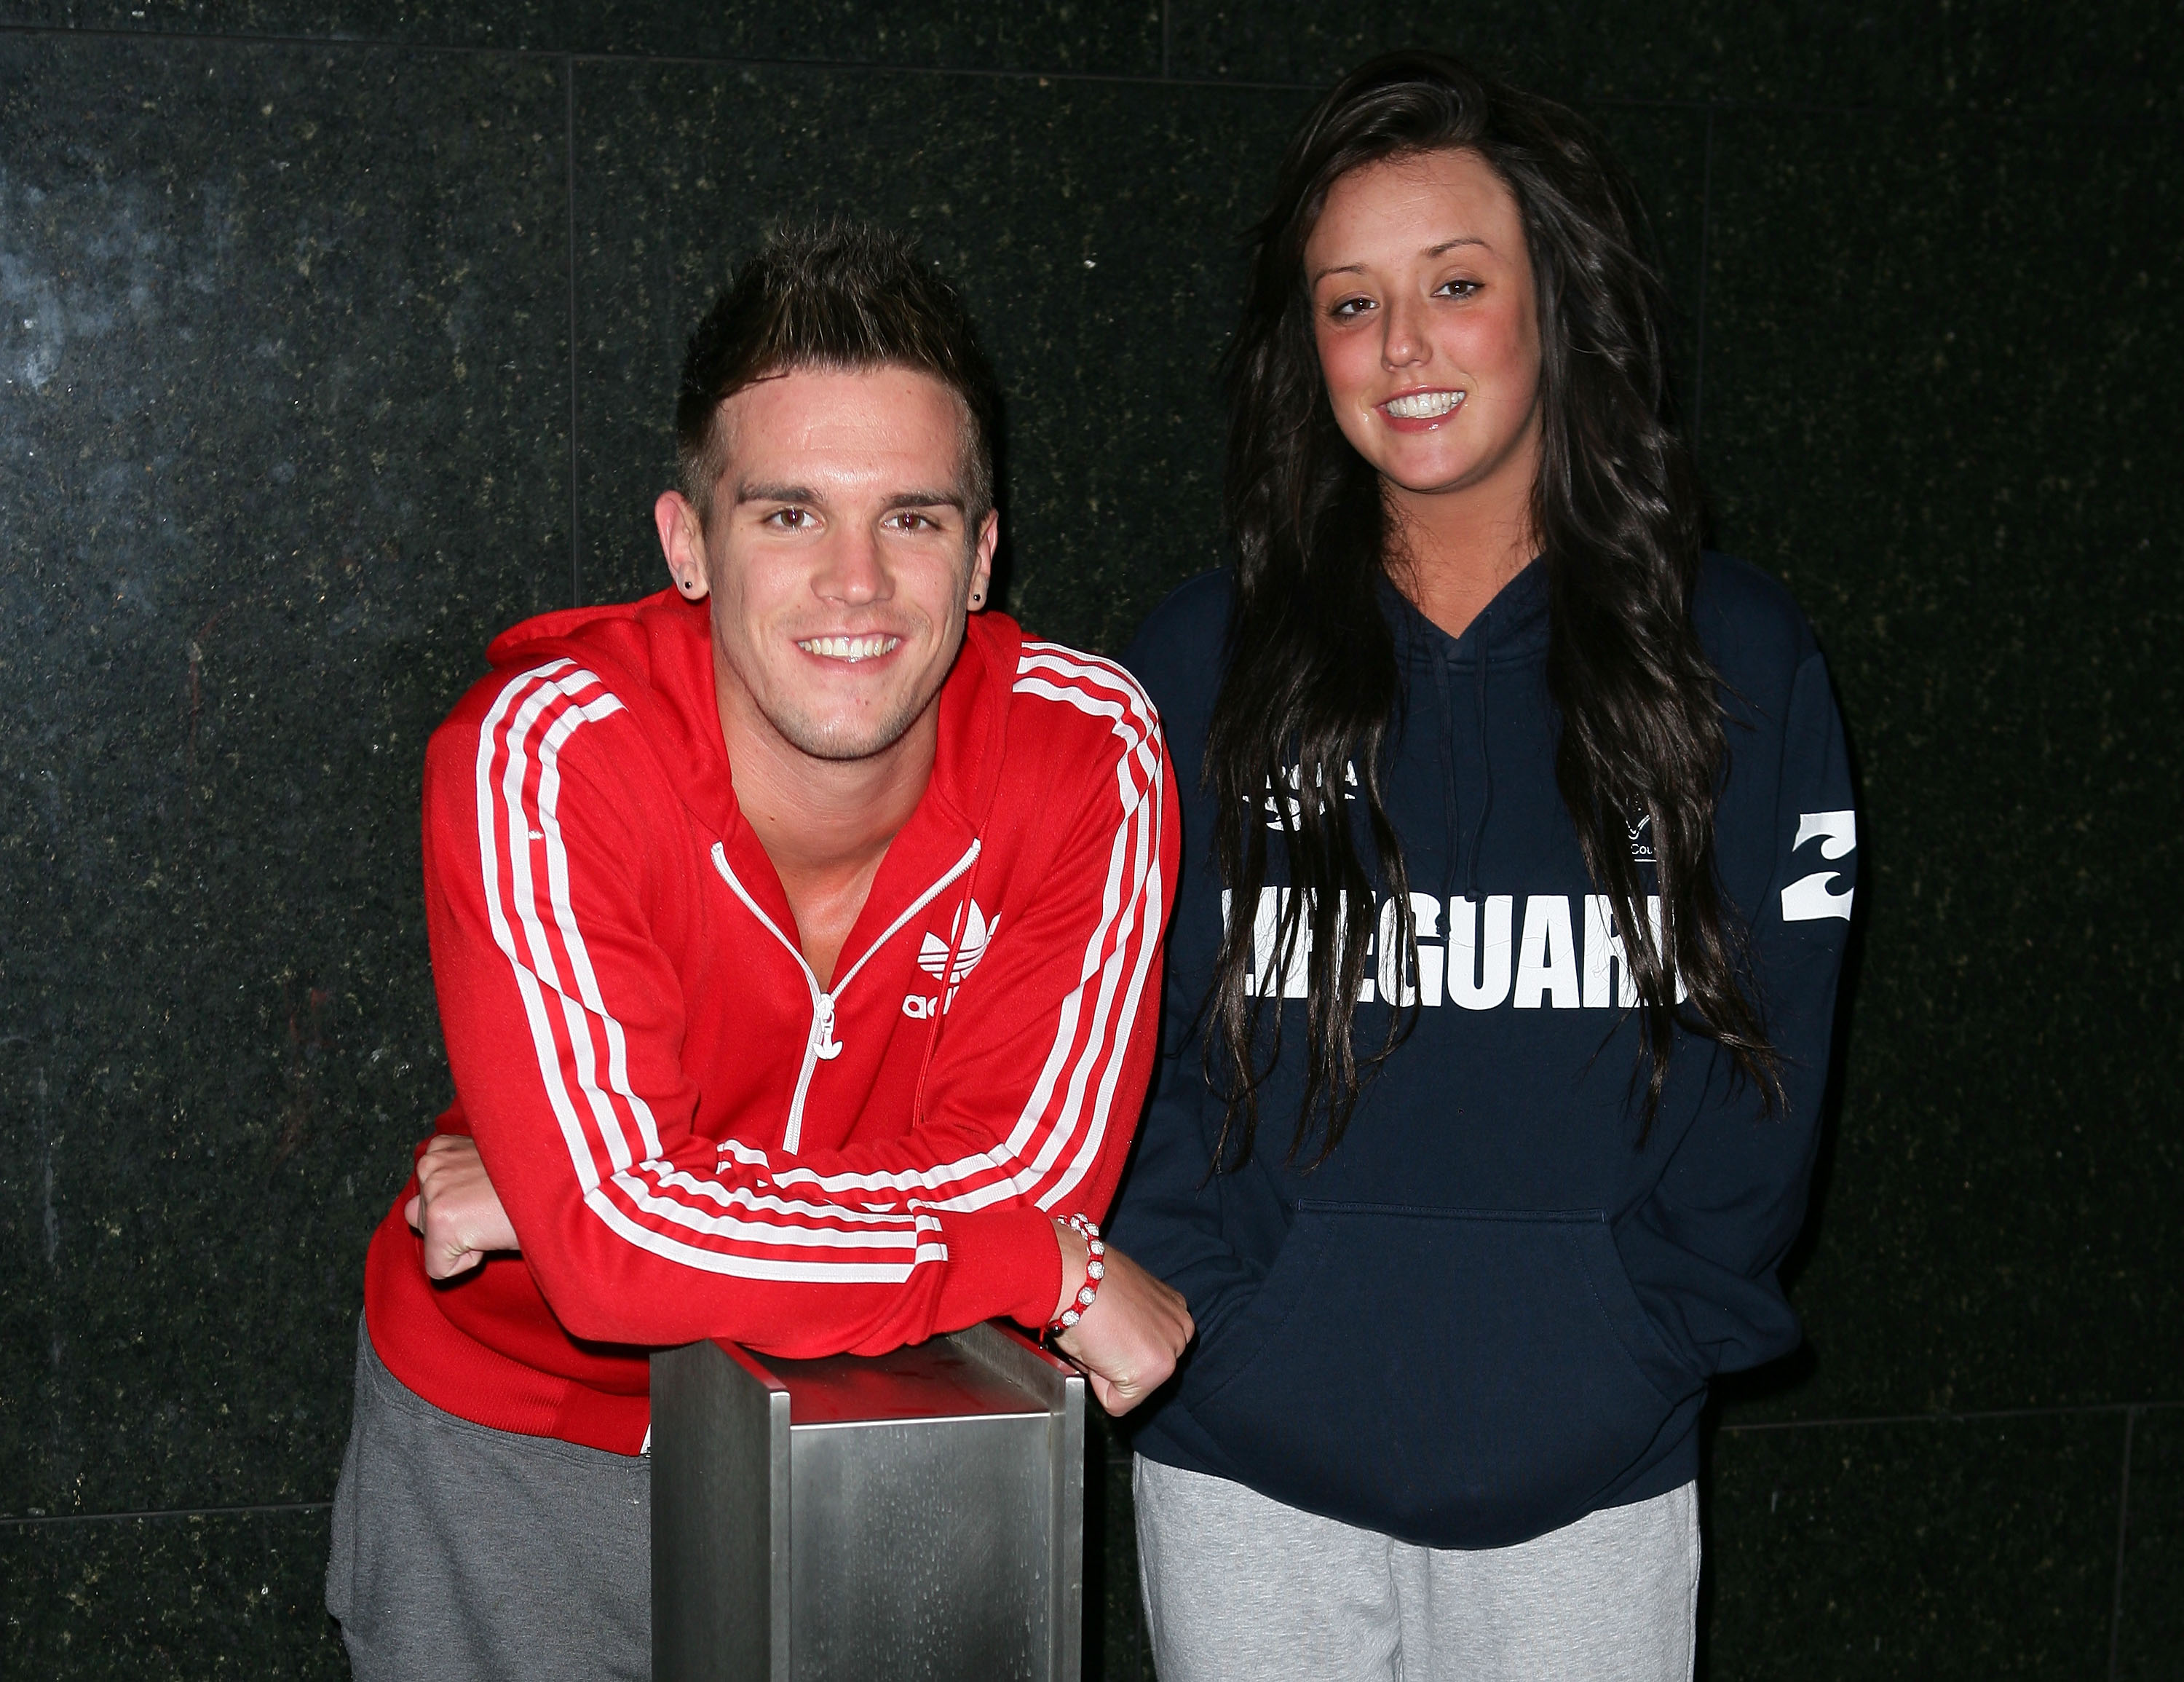 Charlotte And Gaz Rubbish Reports That They’re Secretly Having A Fling